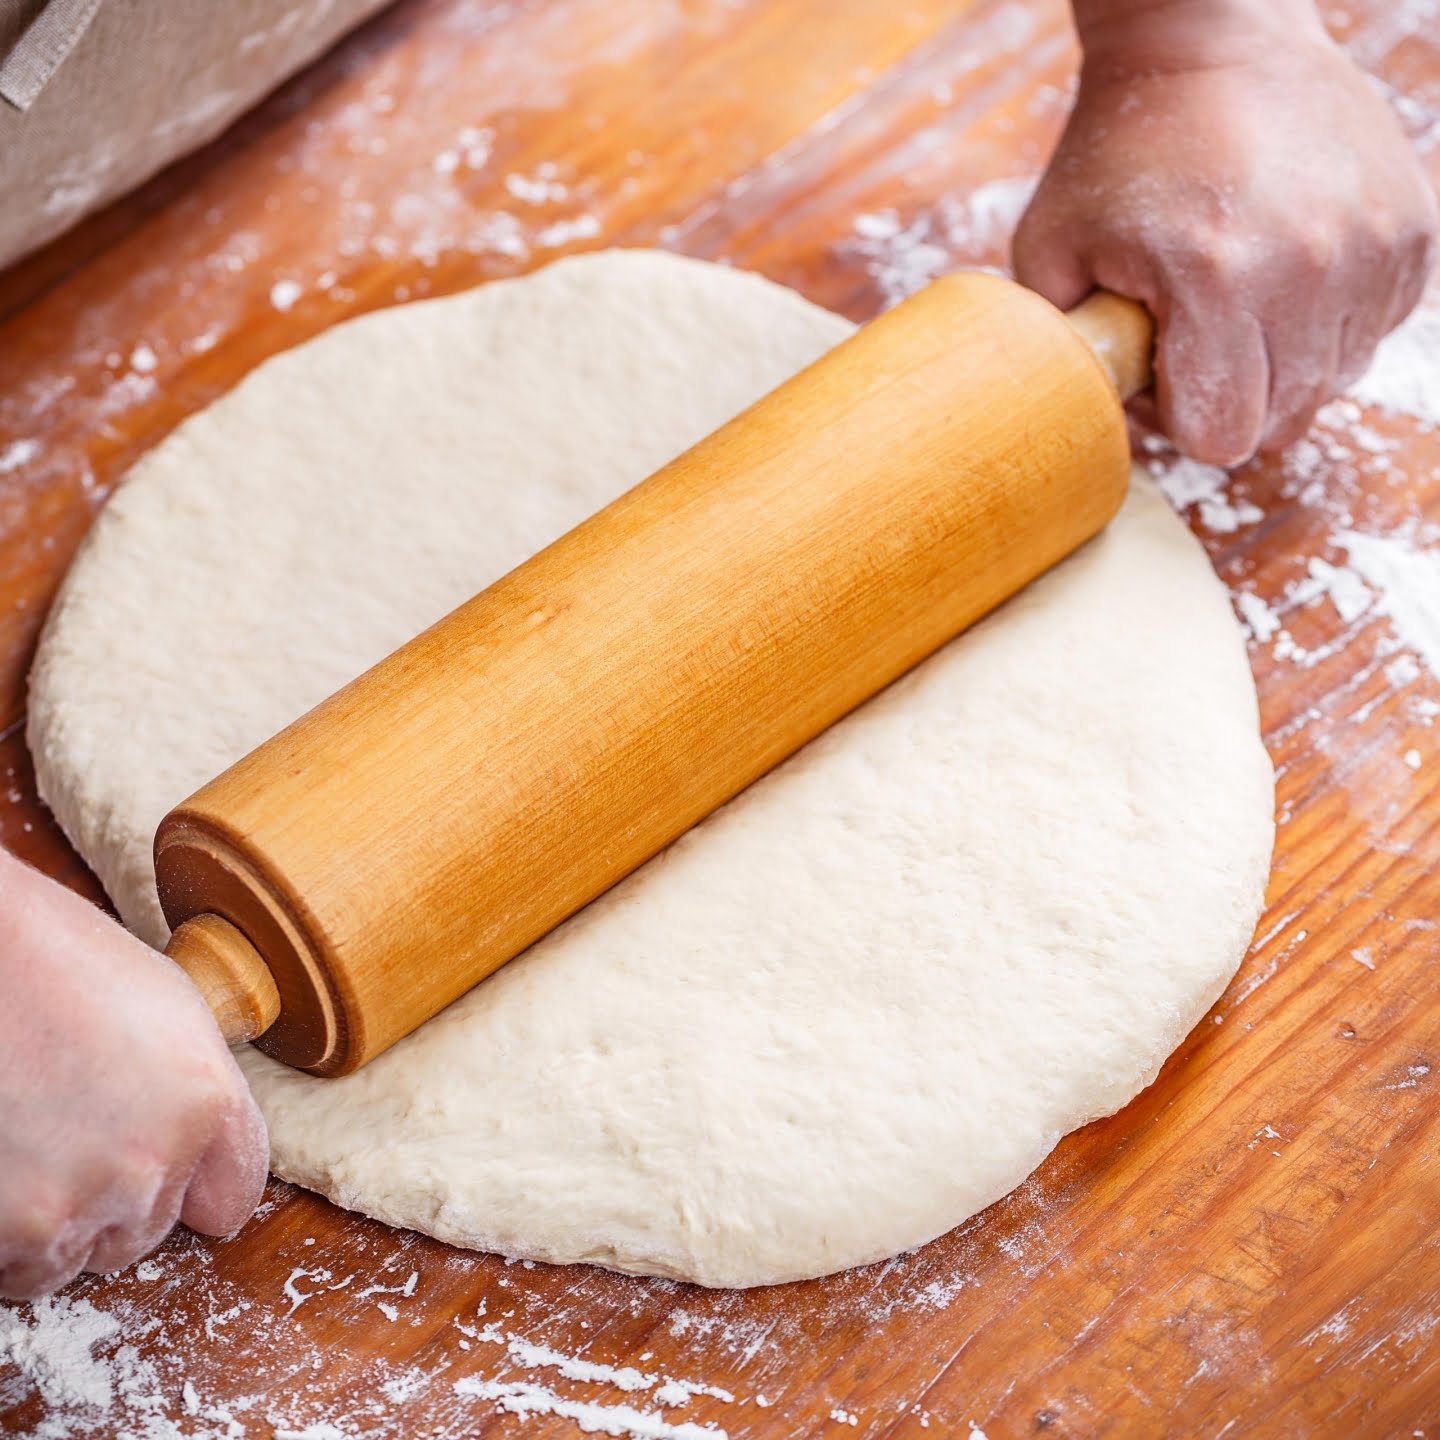 How to roll out pizza dough